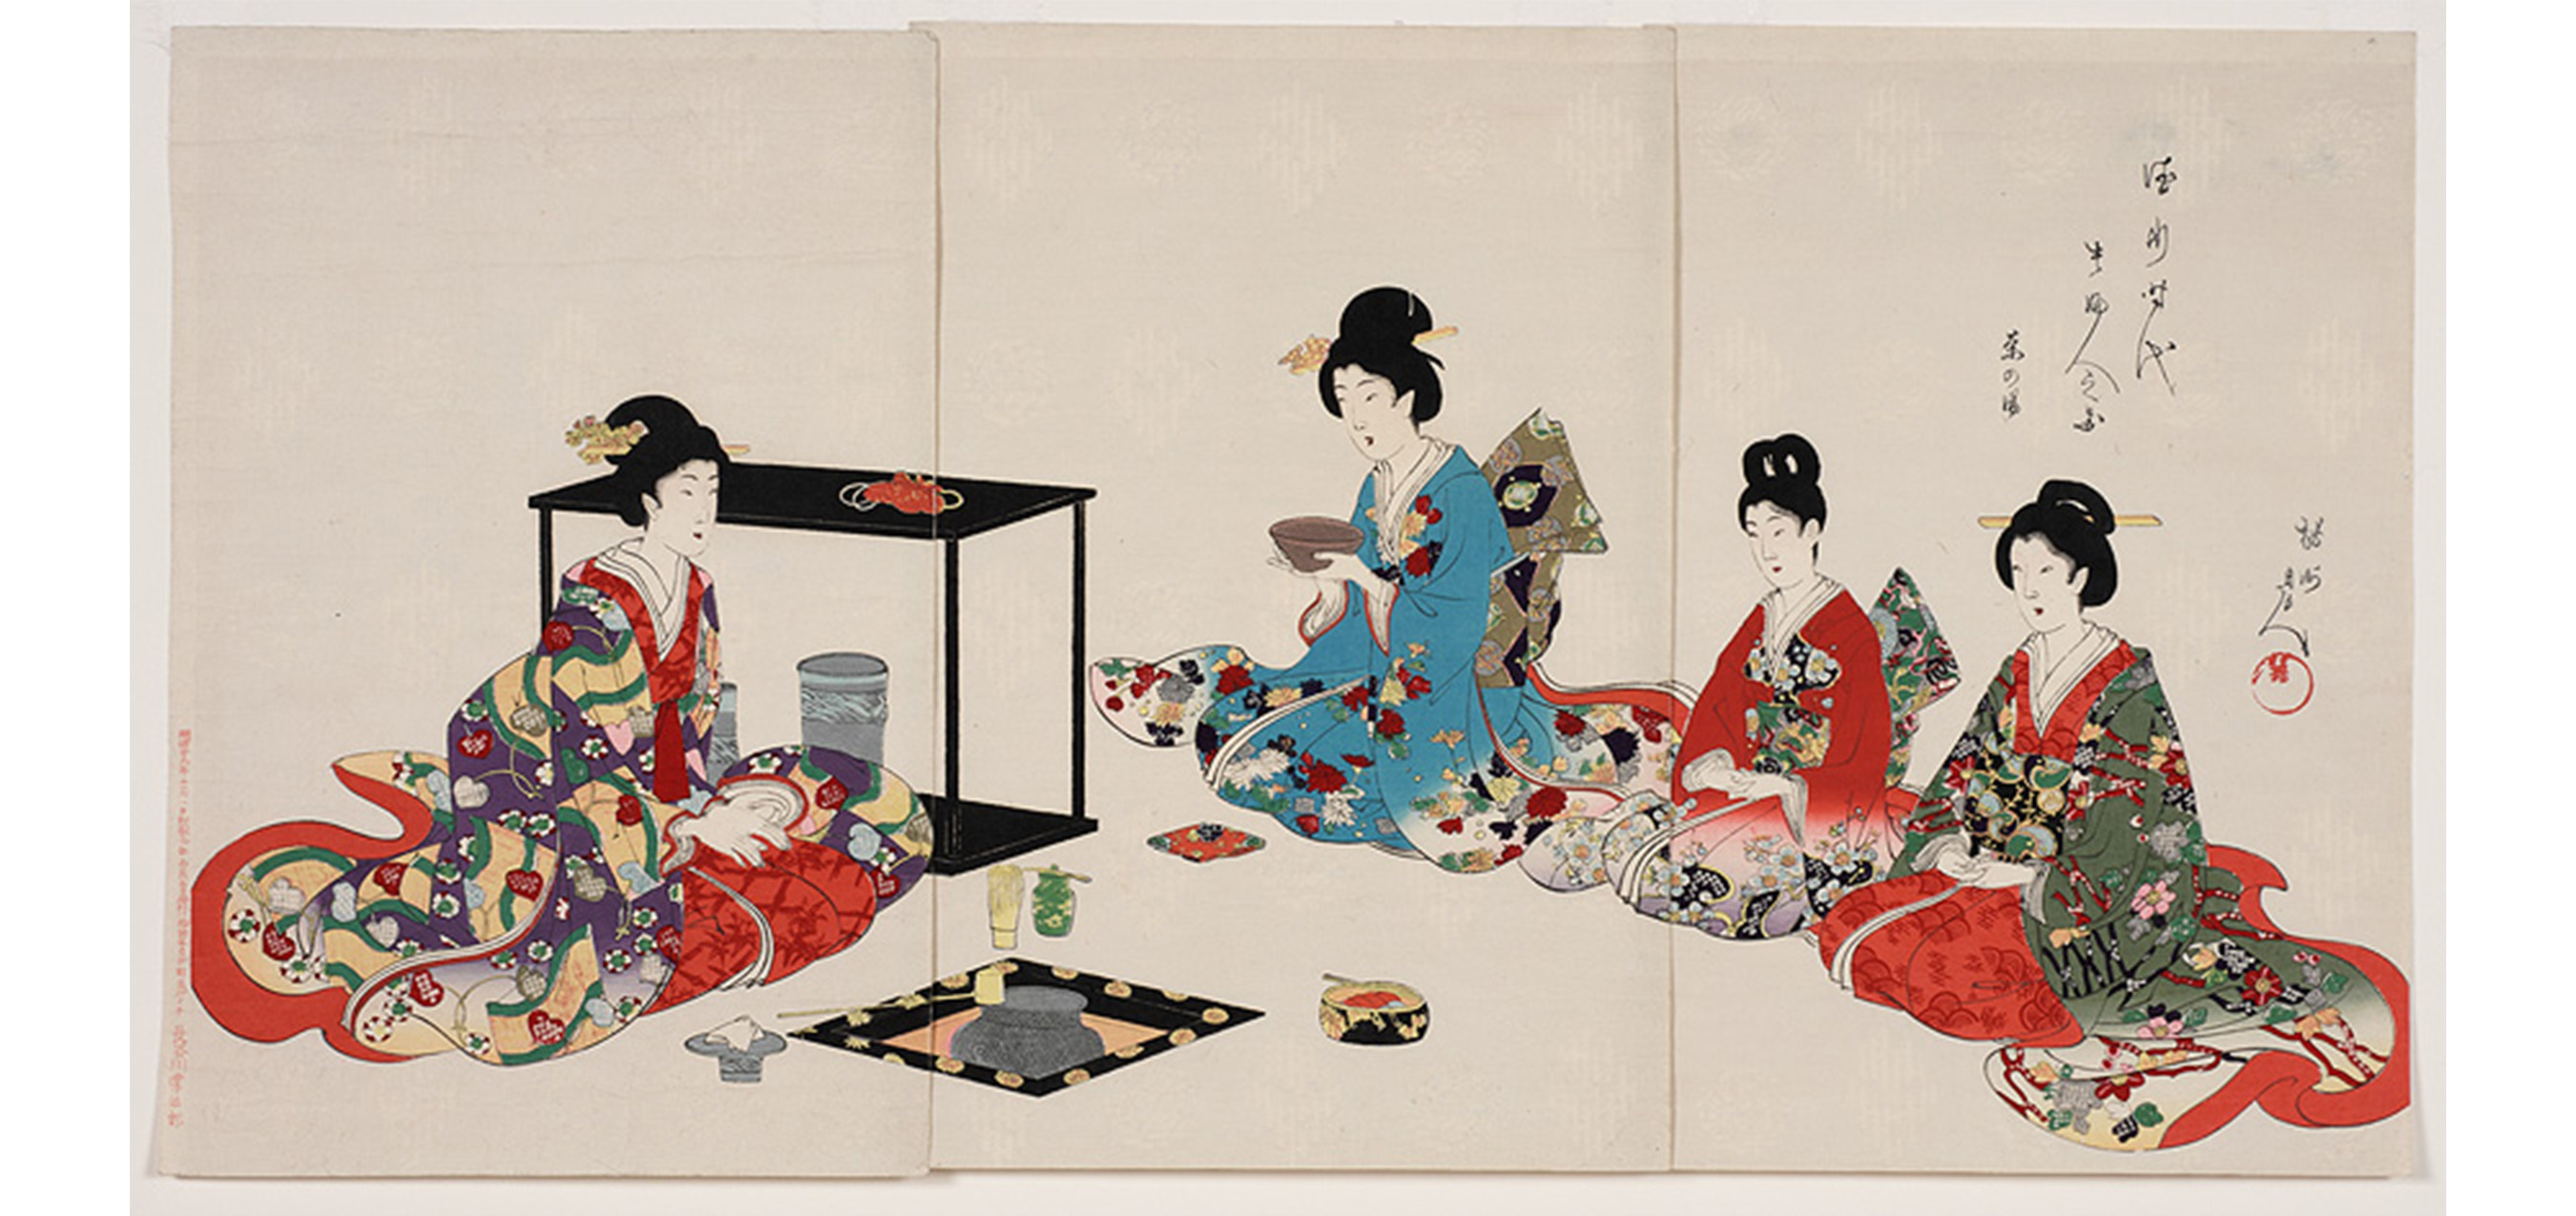 traditional Japanese tea ceremony with four women seated before a sunken hearth and tea ceremony objects, one woman is holding a tea bowl